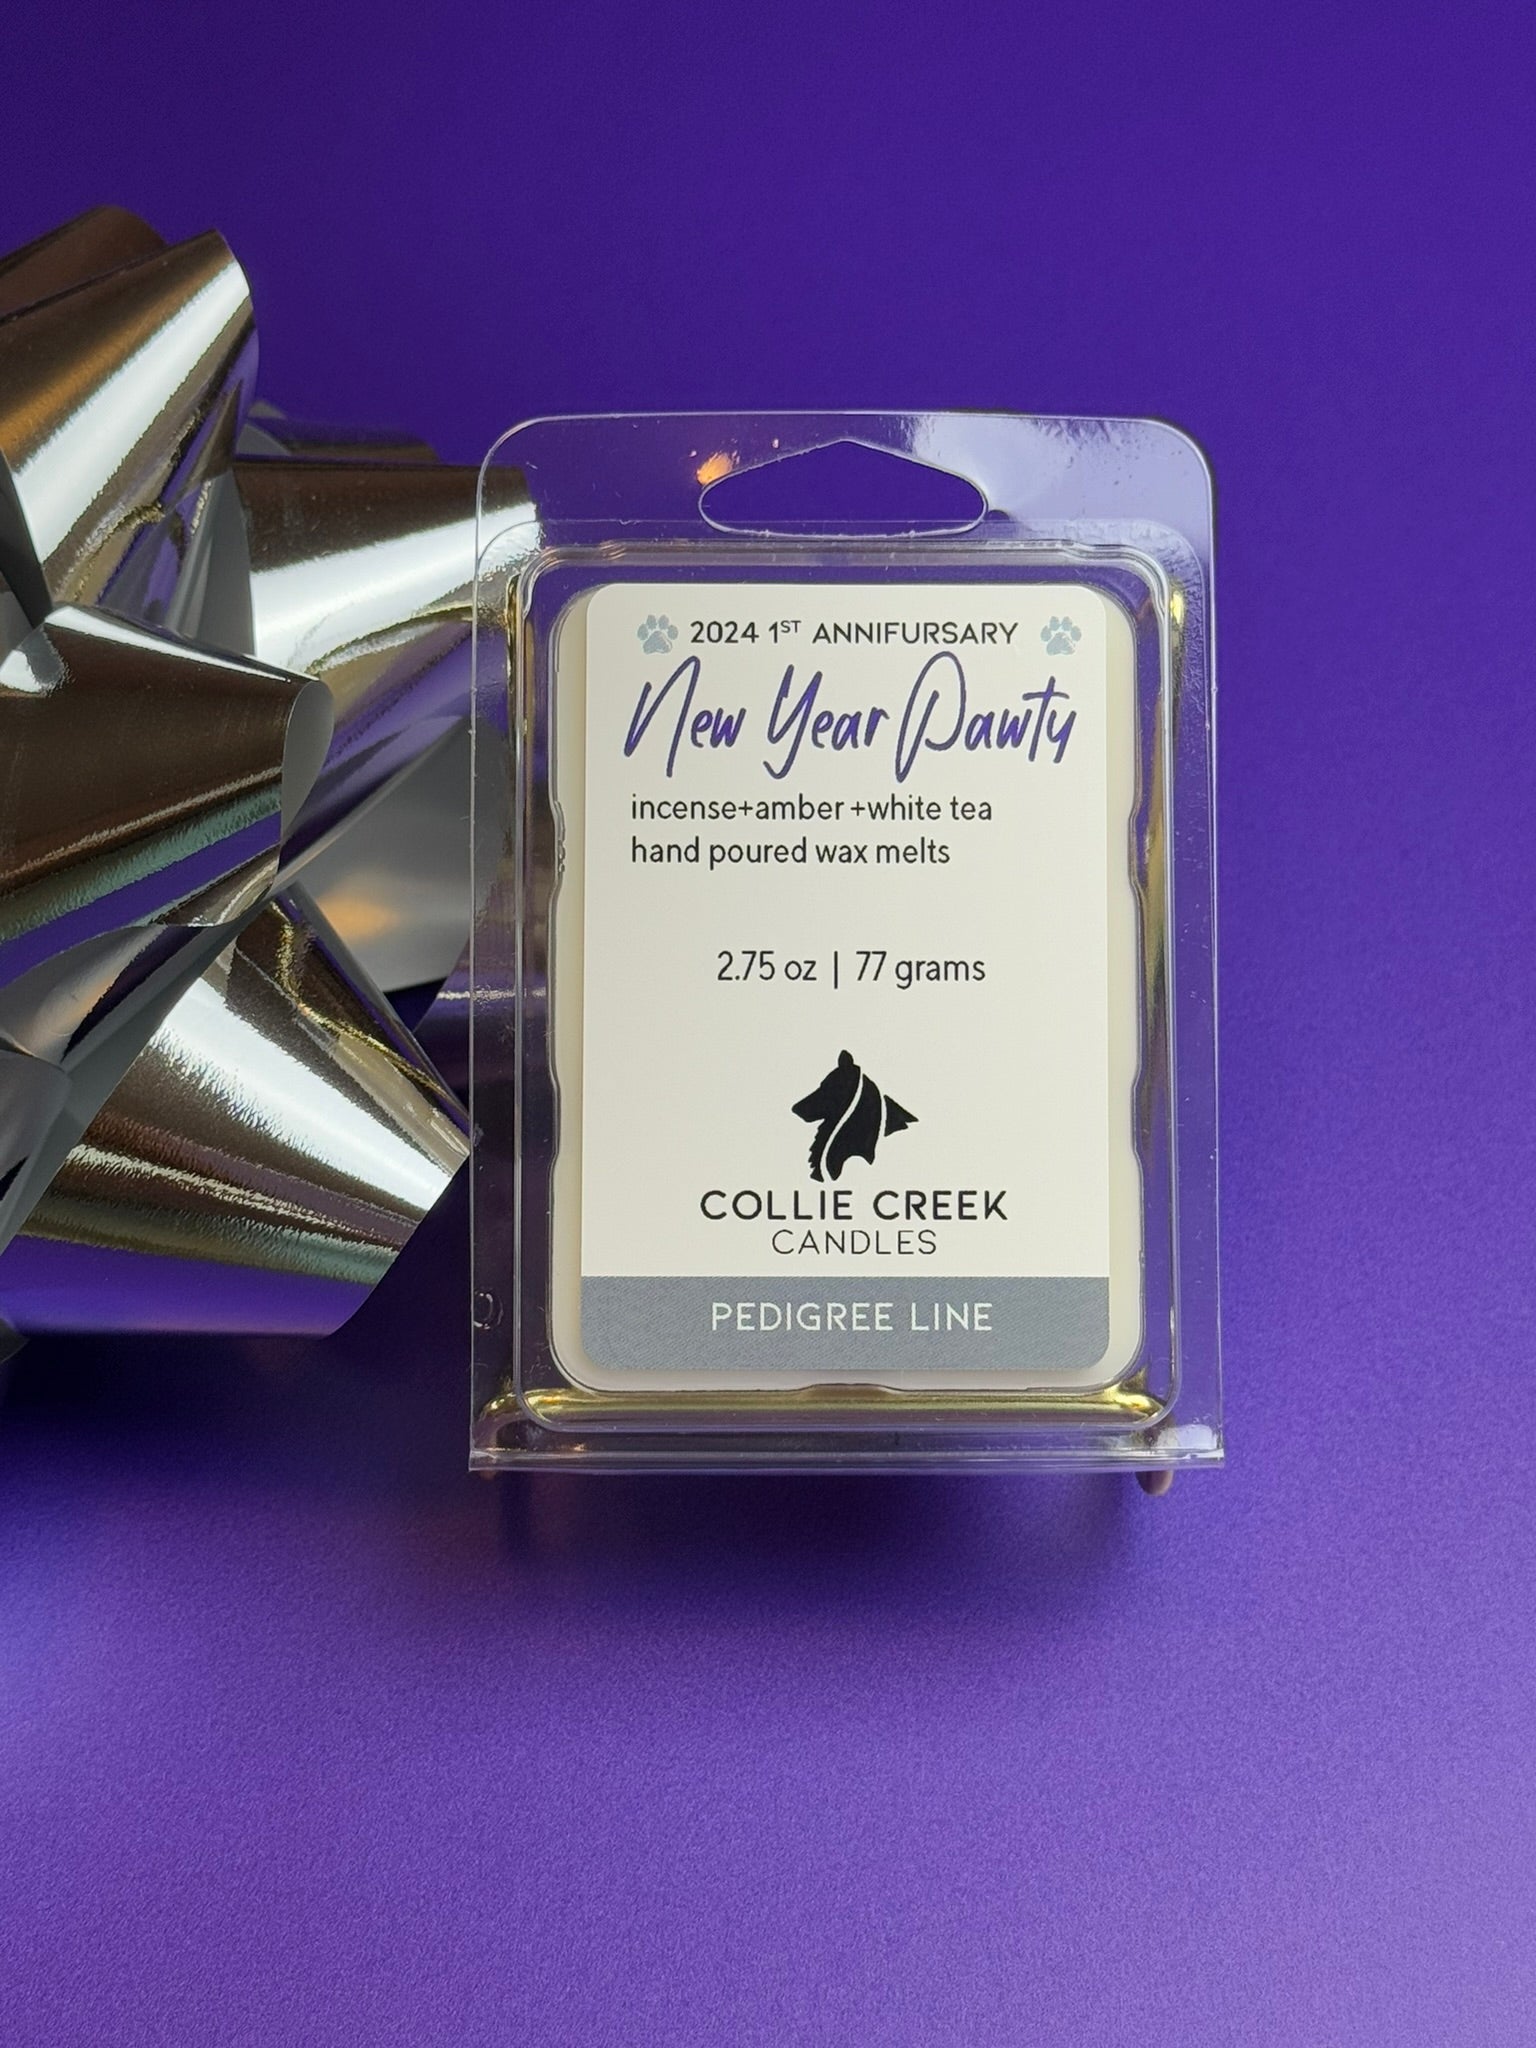 Wax melt called New Year Pawty from Collie Creek Candles on a field of purple